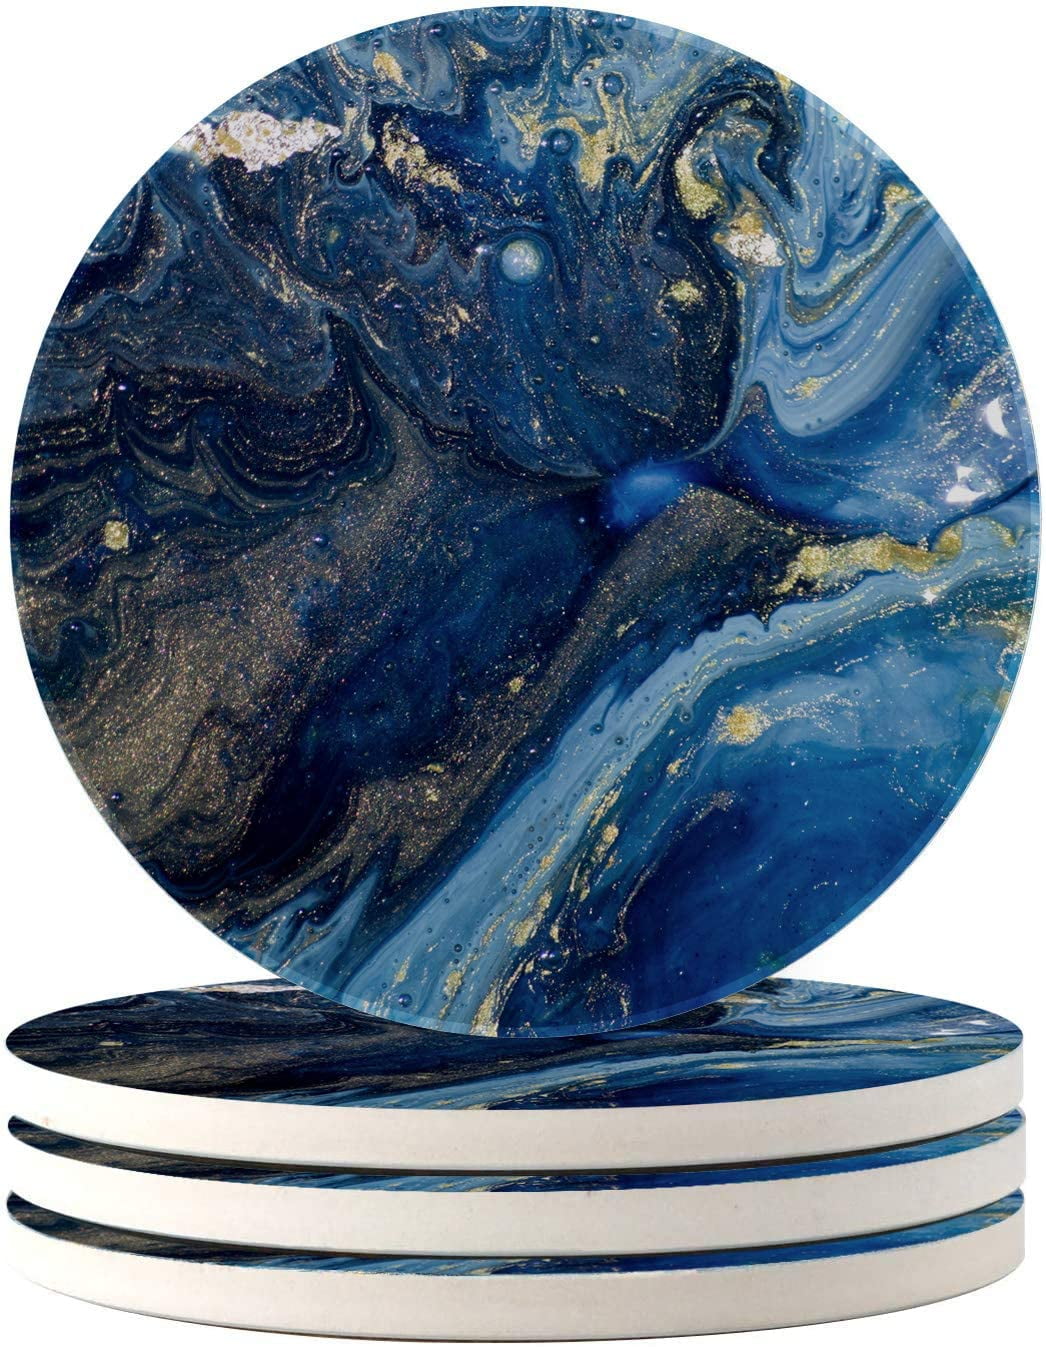 Set of 4 Square Coasters Navy Blue Marble Stone Effect  #21087 